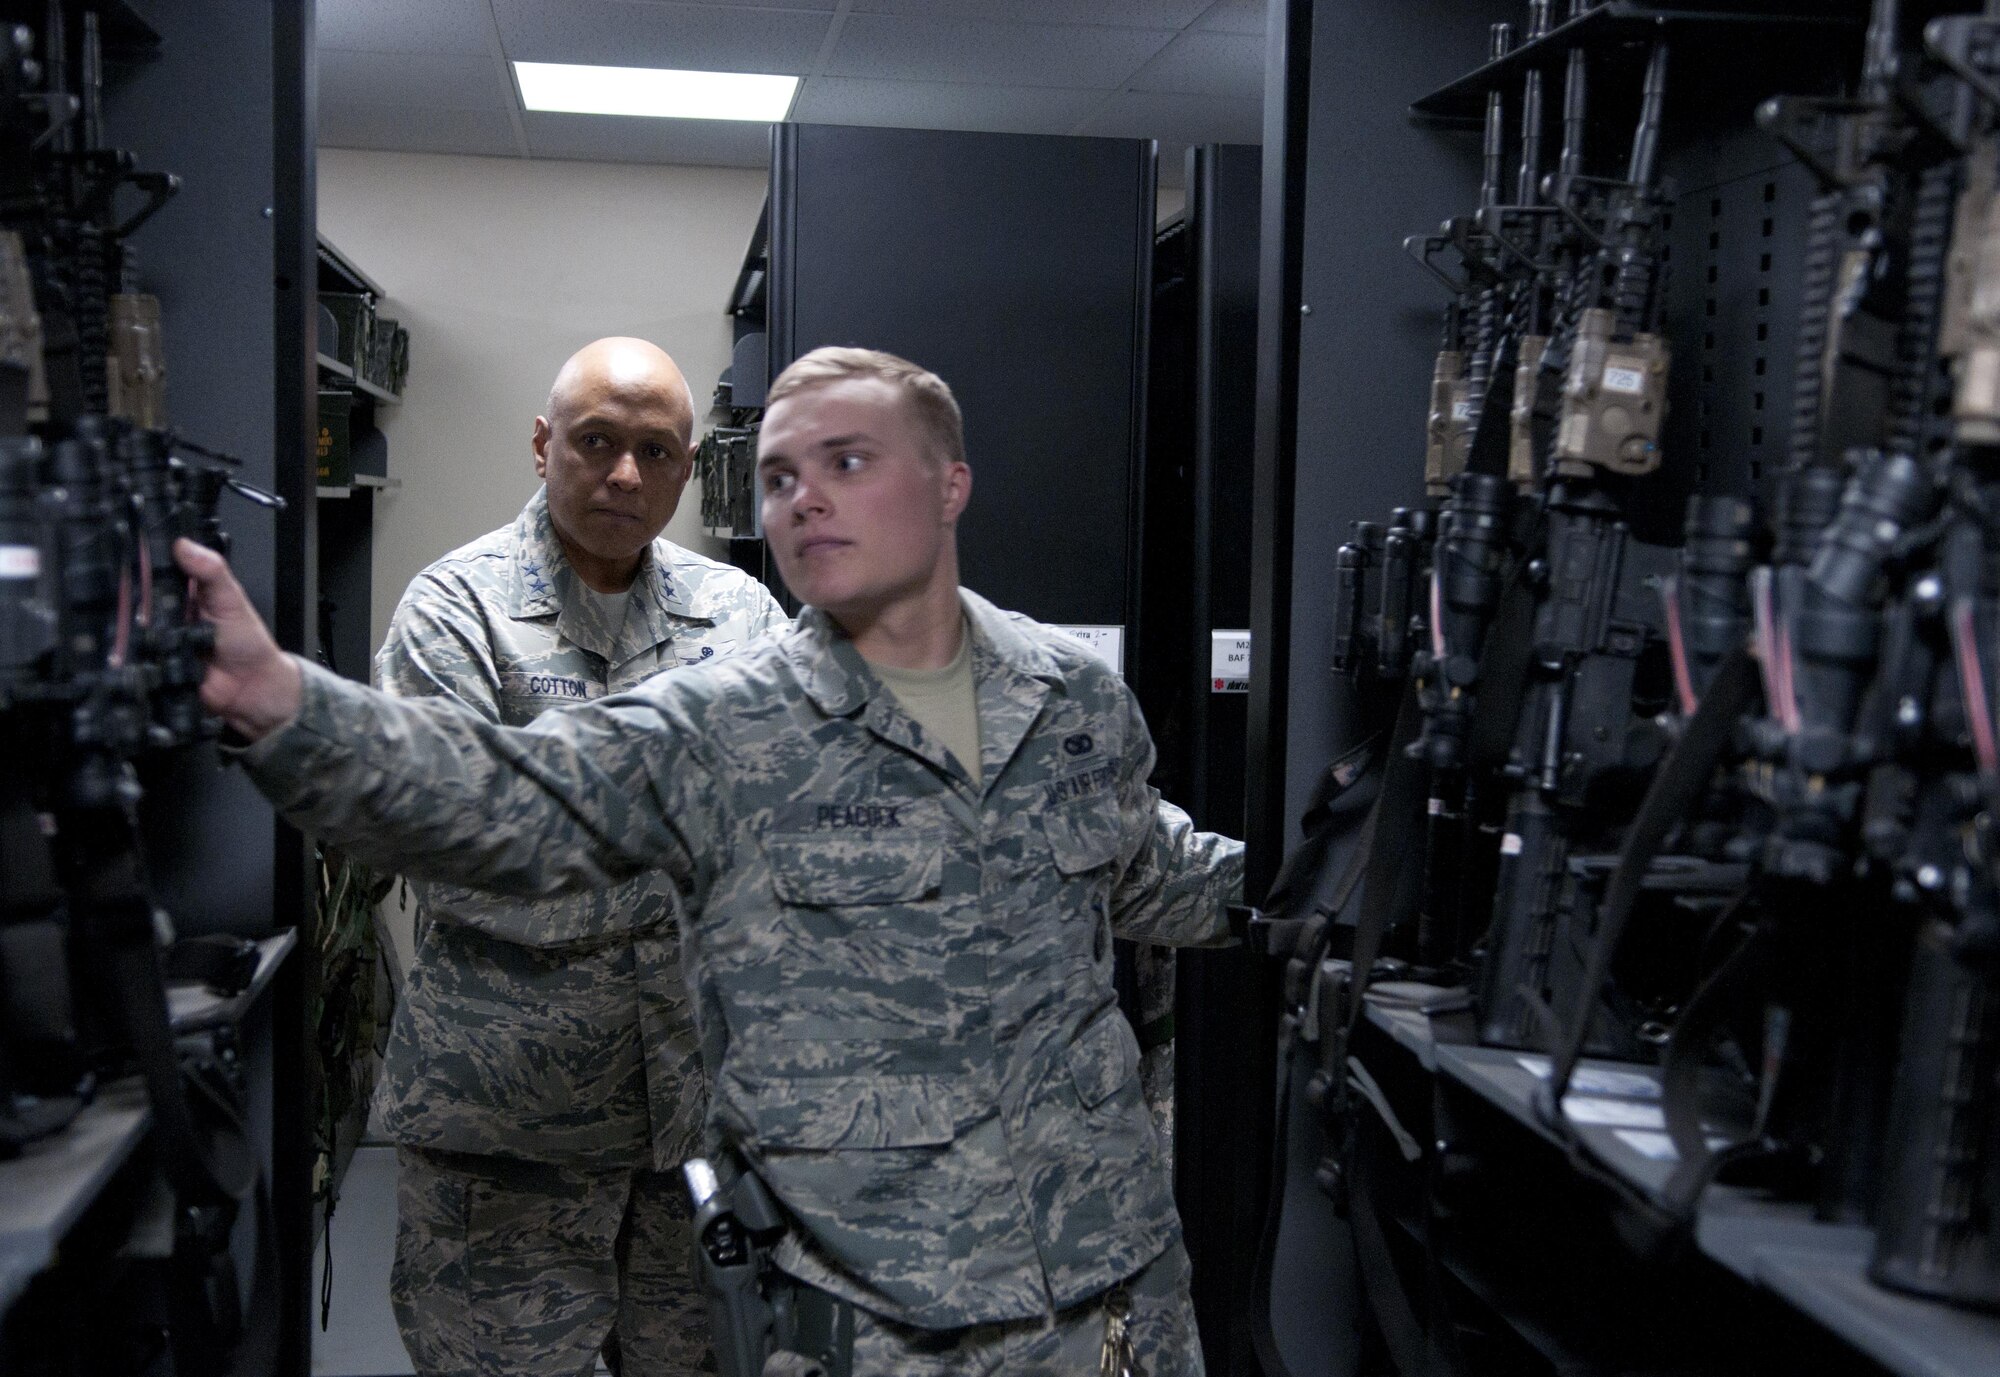 Airman 1st Class Brent Peacock, 90th Security Support Squadron member, guides Maj. Gen. Anthony Cotton, 20th Air Force and Task Force 214 commander, through the 90th Security Forces Group Armory, April 28, 2016, on F.E. Warren Air Force Base, Wyo. At each stop during Cotton’s visit he asked the Airmen if there was anything they would change if they could; many provided a detailed answer. (U.S. Air Force photo by Airman 1st Class Malcolm Mayfield)